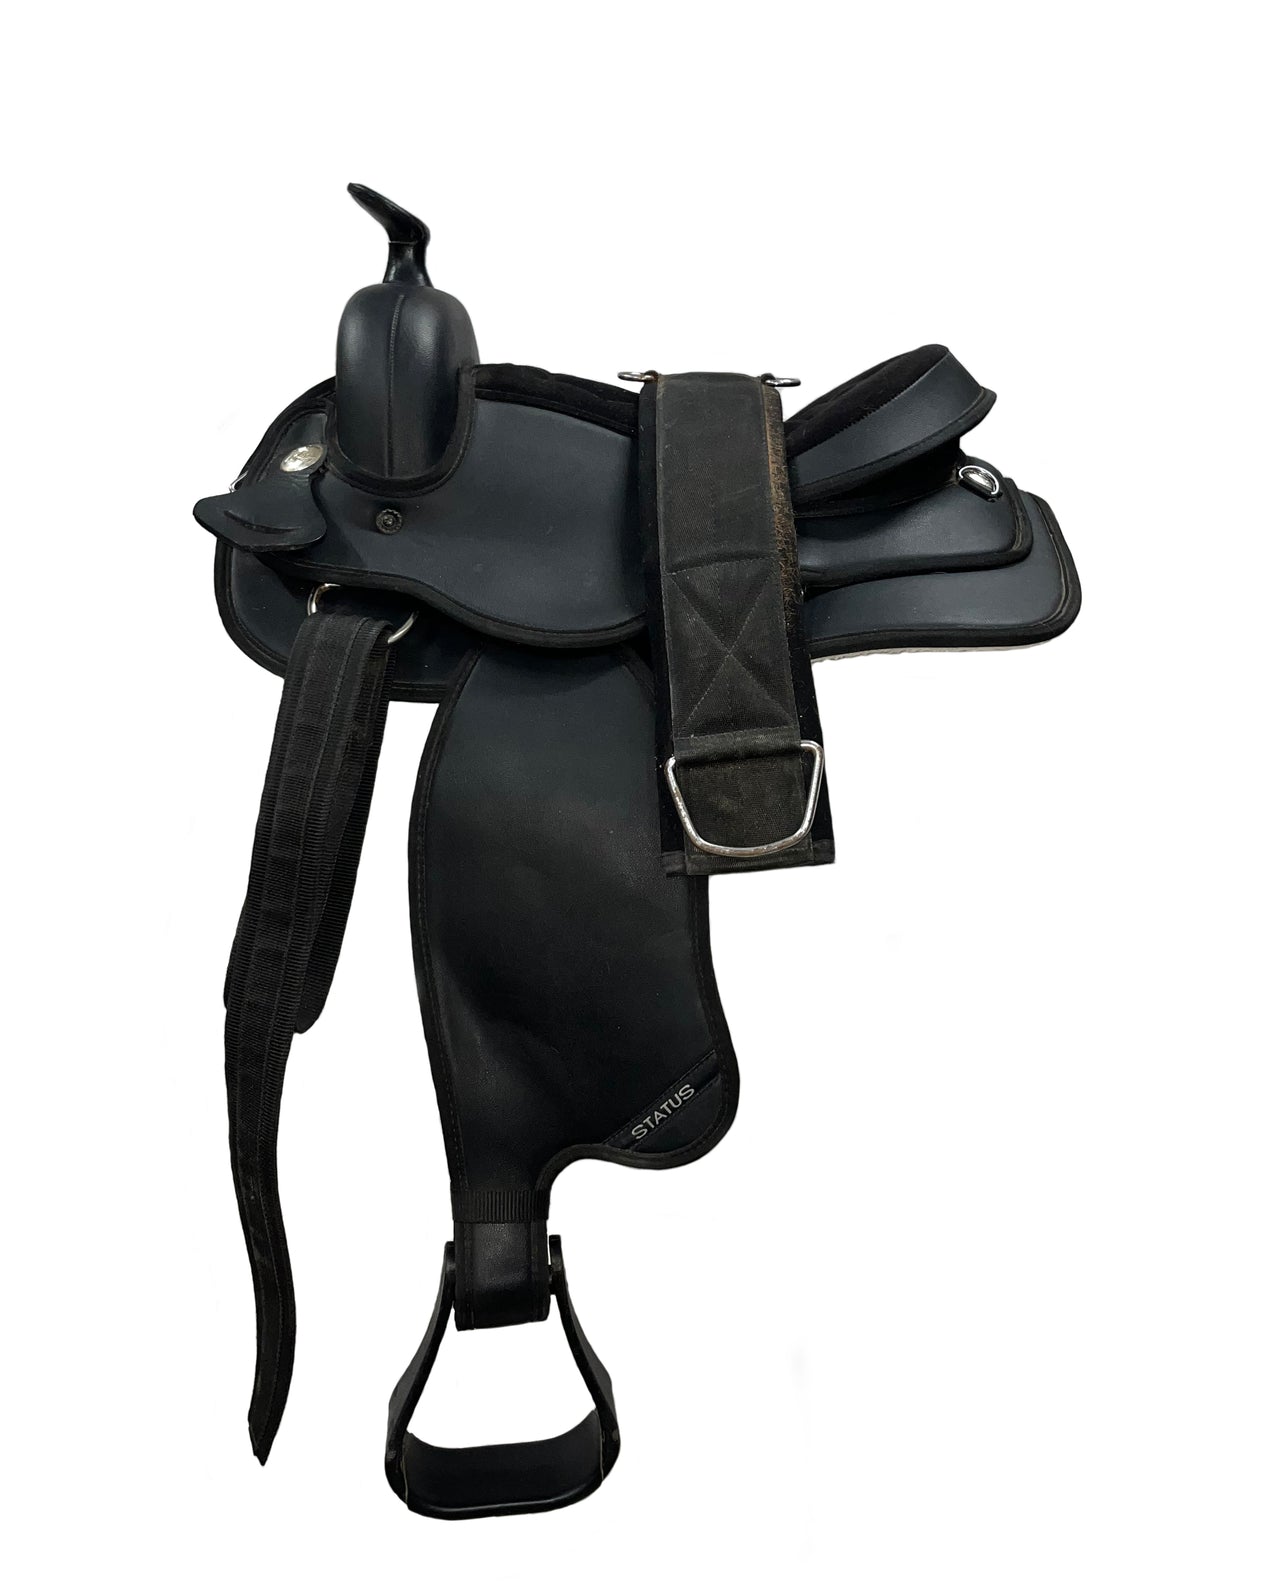 Status Western Saddle SQHB 15 Inch Second Hand - The Trading Stables